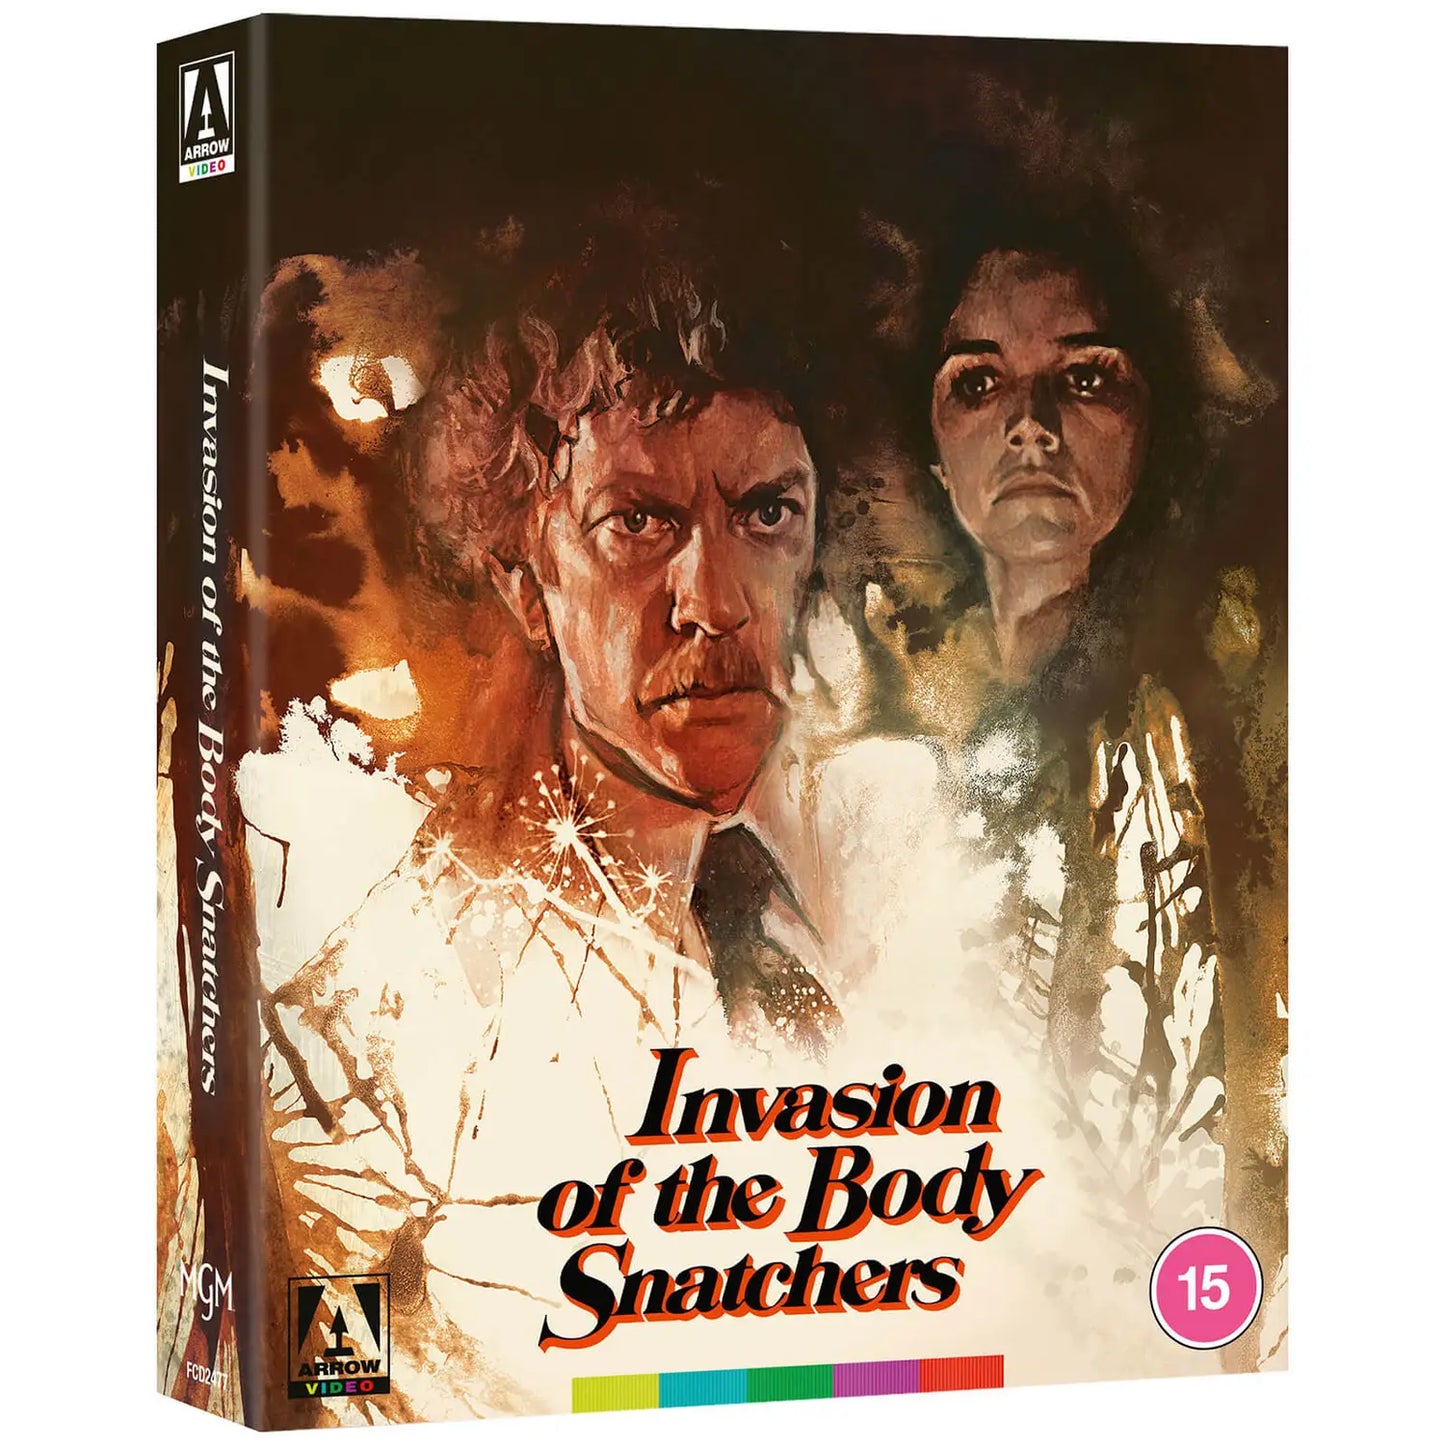 Invasion of the Body Snatchers Limited Edition Arrow Video Blu-Ray [PRE-ORDER] [SLIPCOVER]